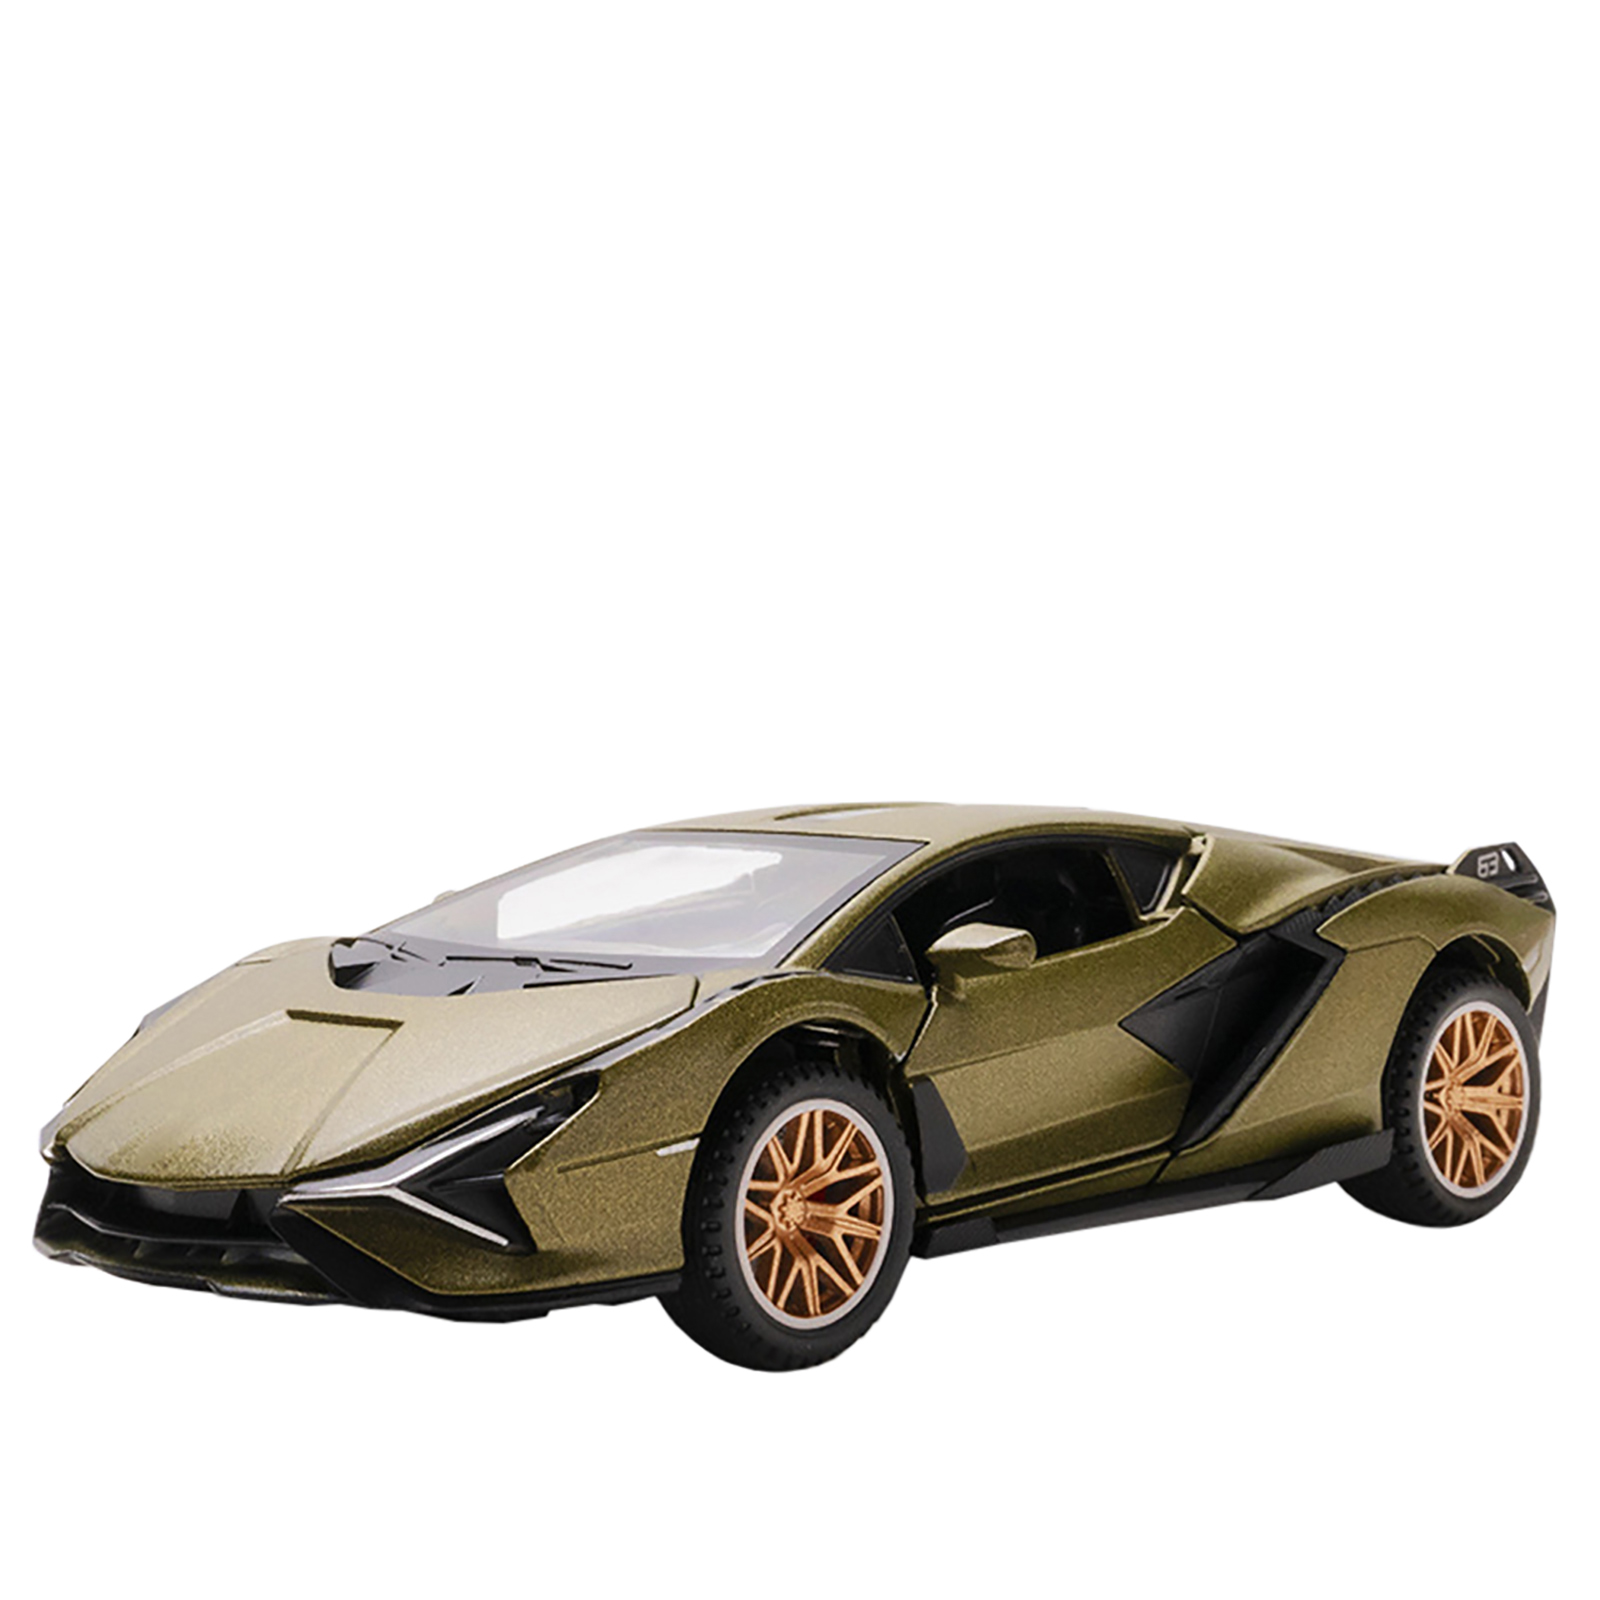 1/32 Alloy Sports Car Model Ornaments Simulation 4-door Openable Diecast Vehicle With Sound Light For Boys Gifts Collection